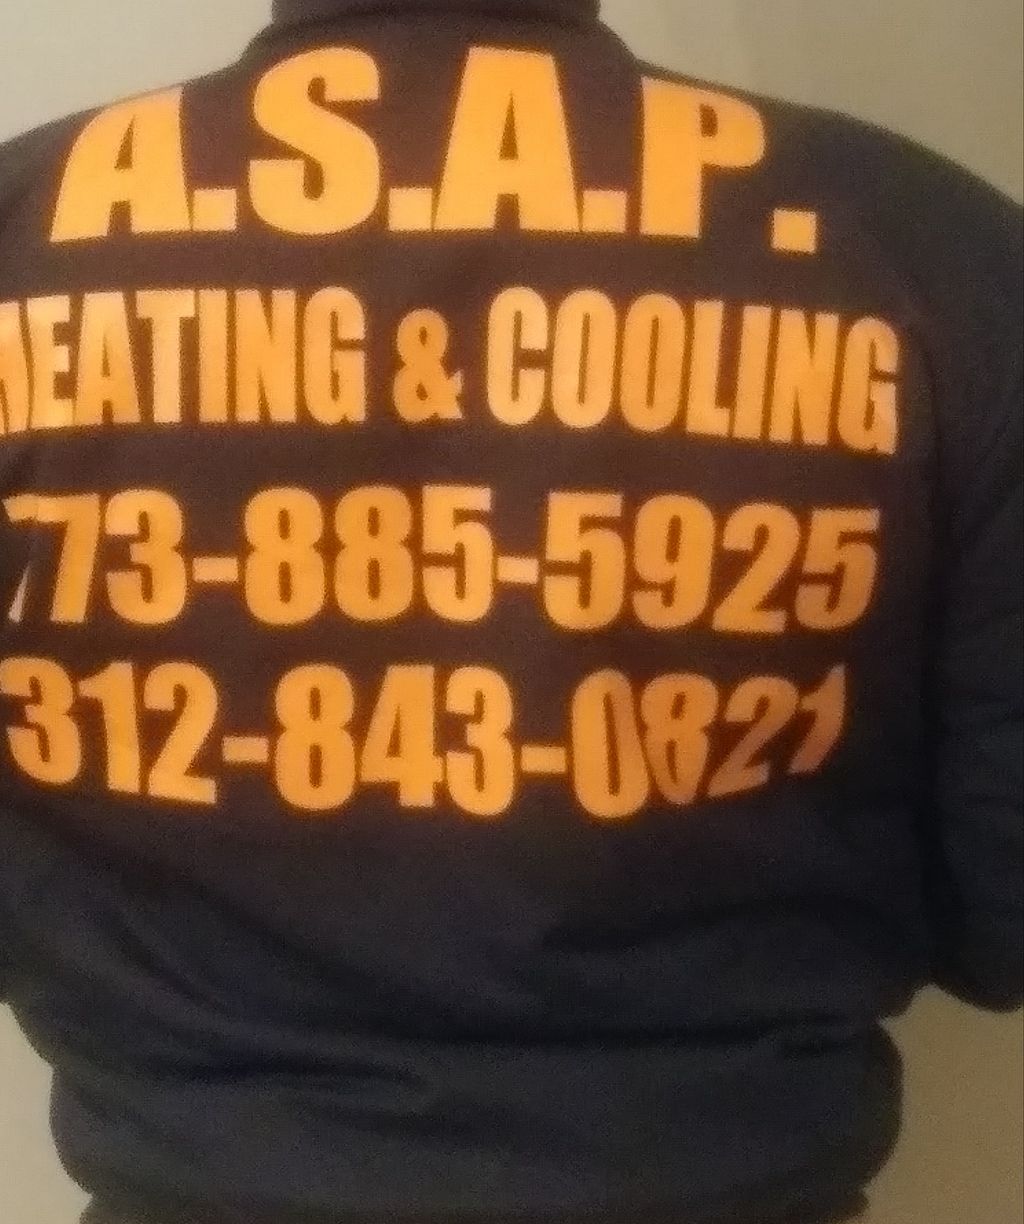 ASAP Heating and Cooling